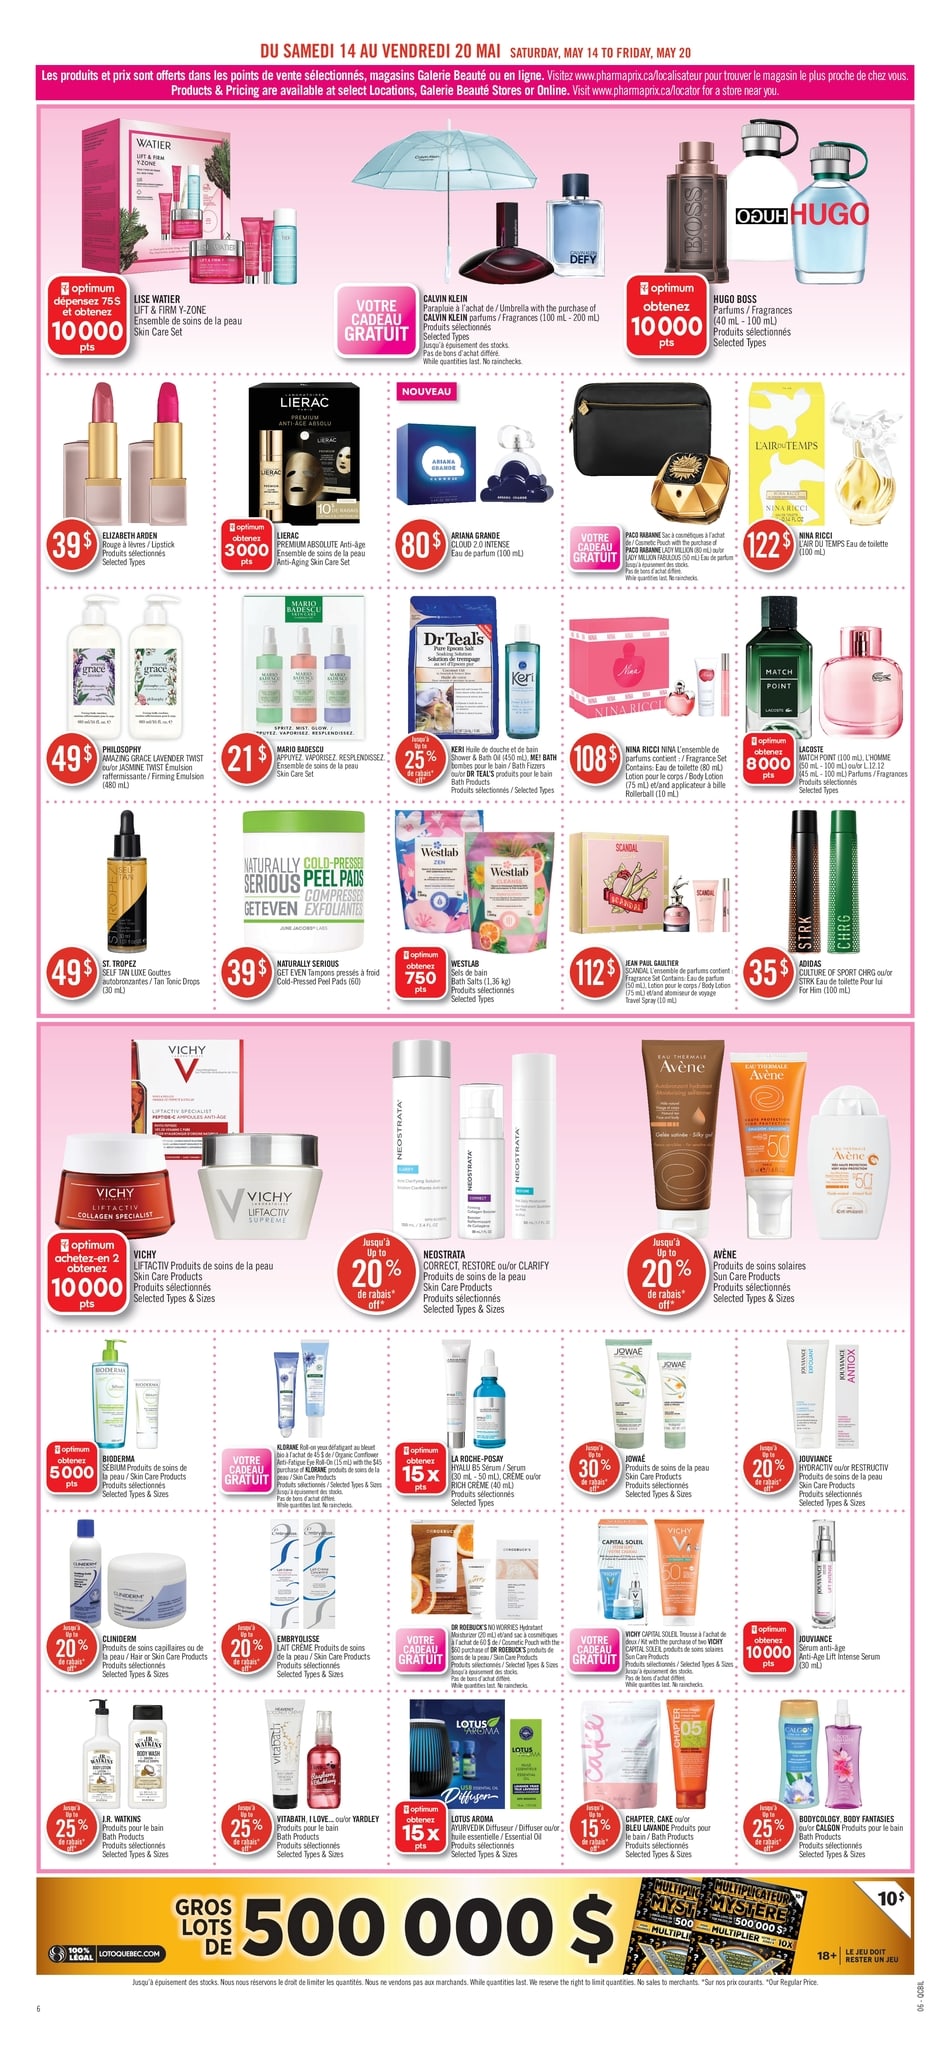 Pharmaprix - Weekly Flyer Specials - Page 10